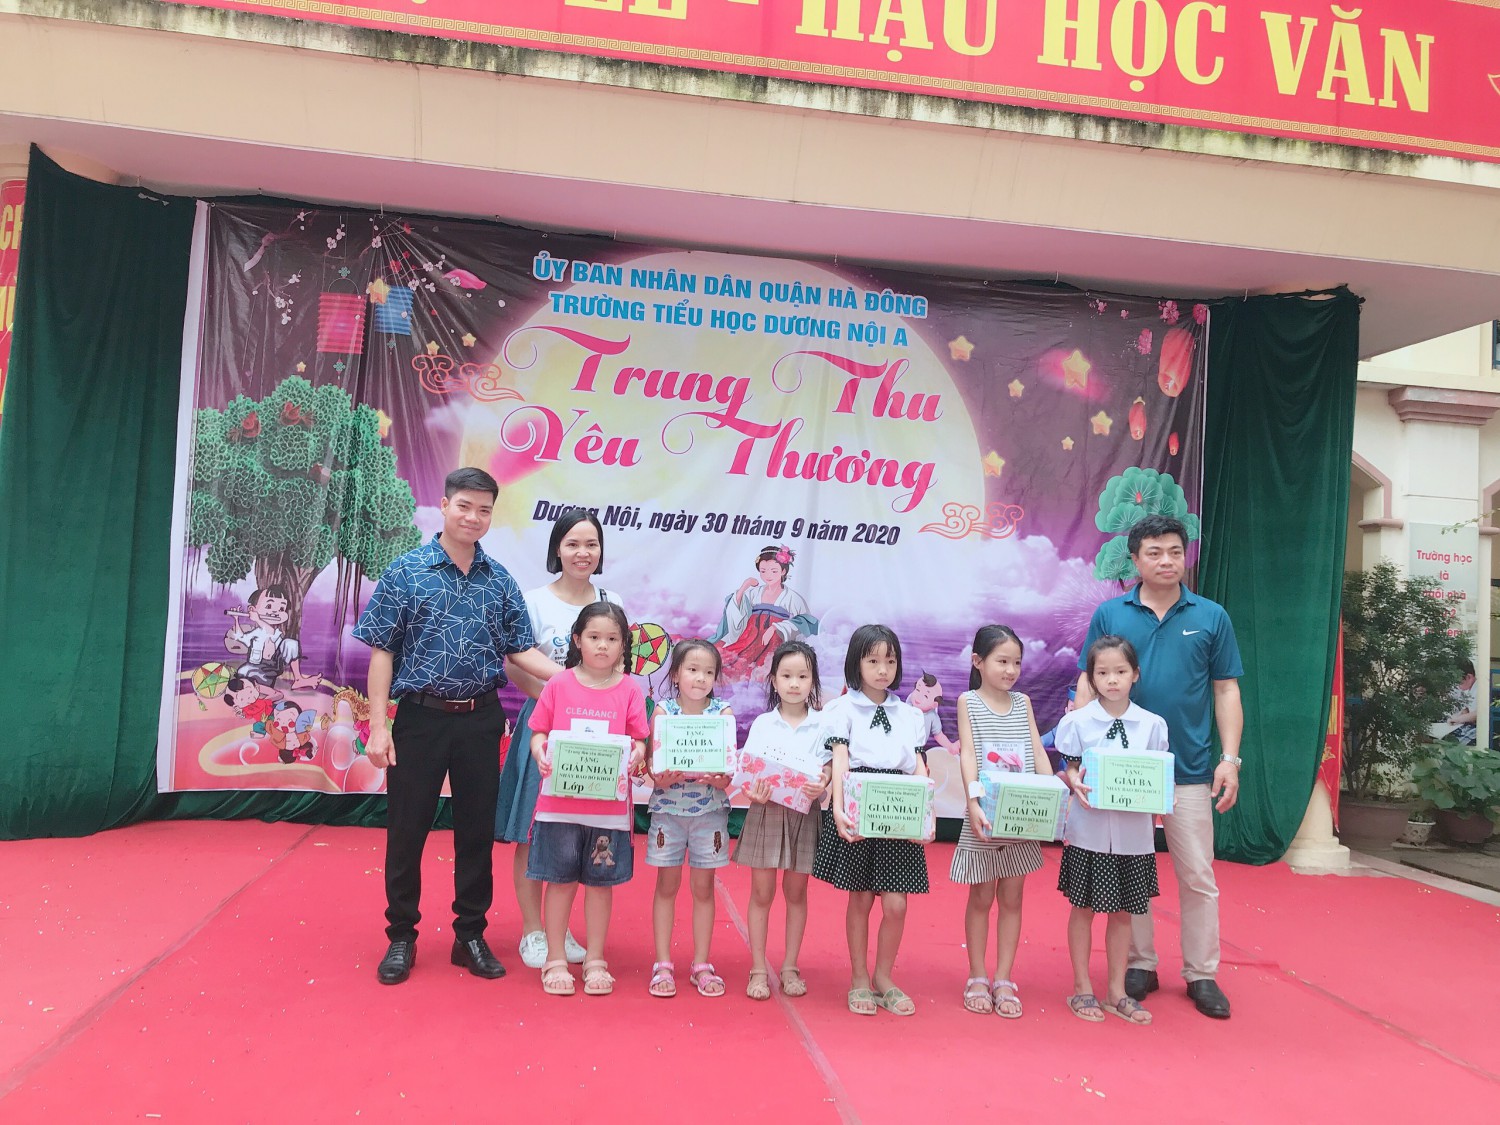 Le tra phan thuong cho cac lop dat giai